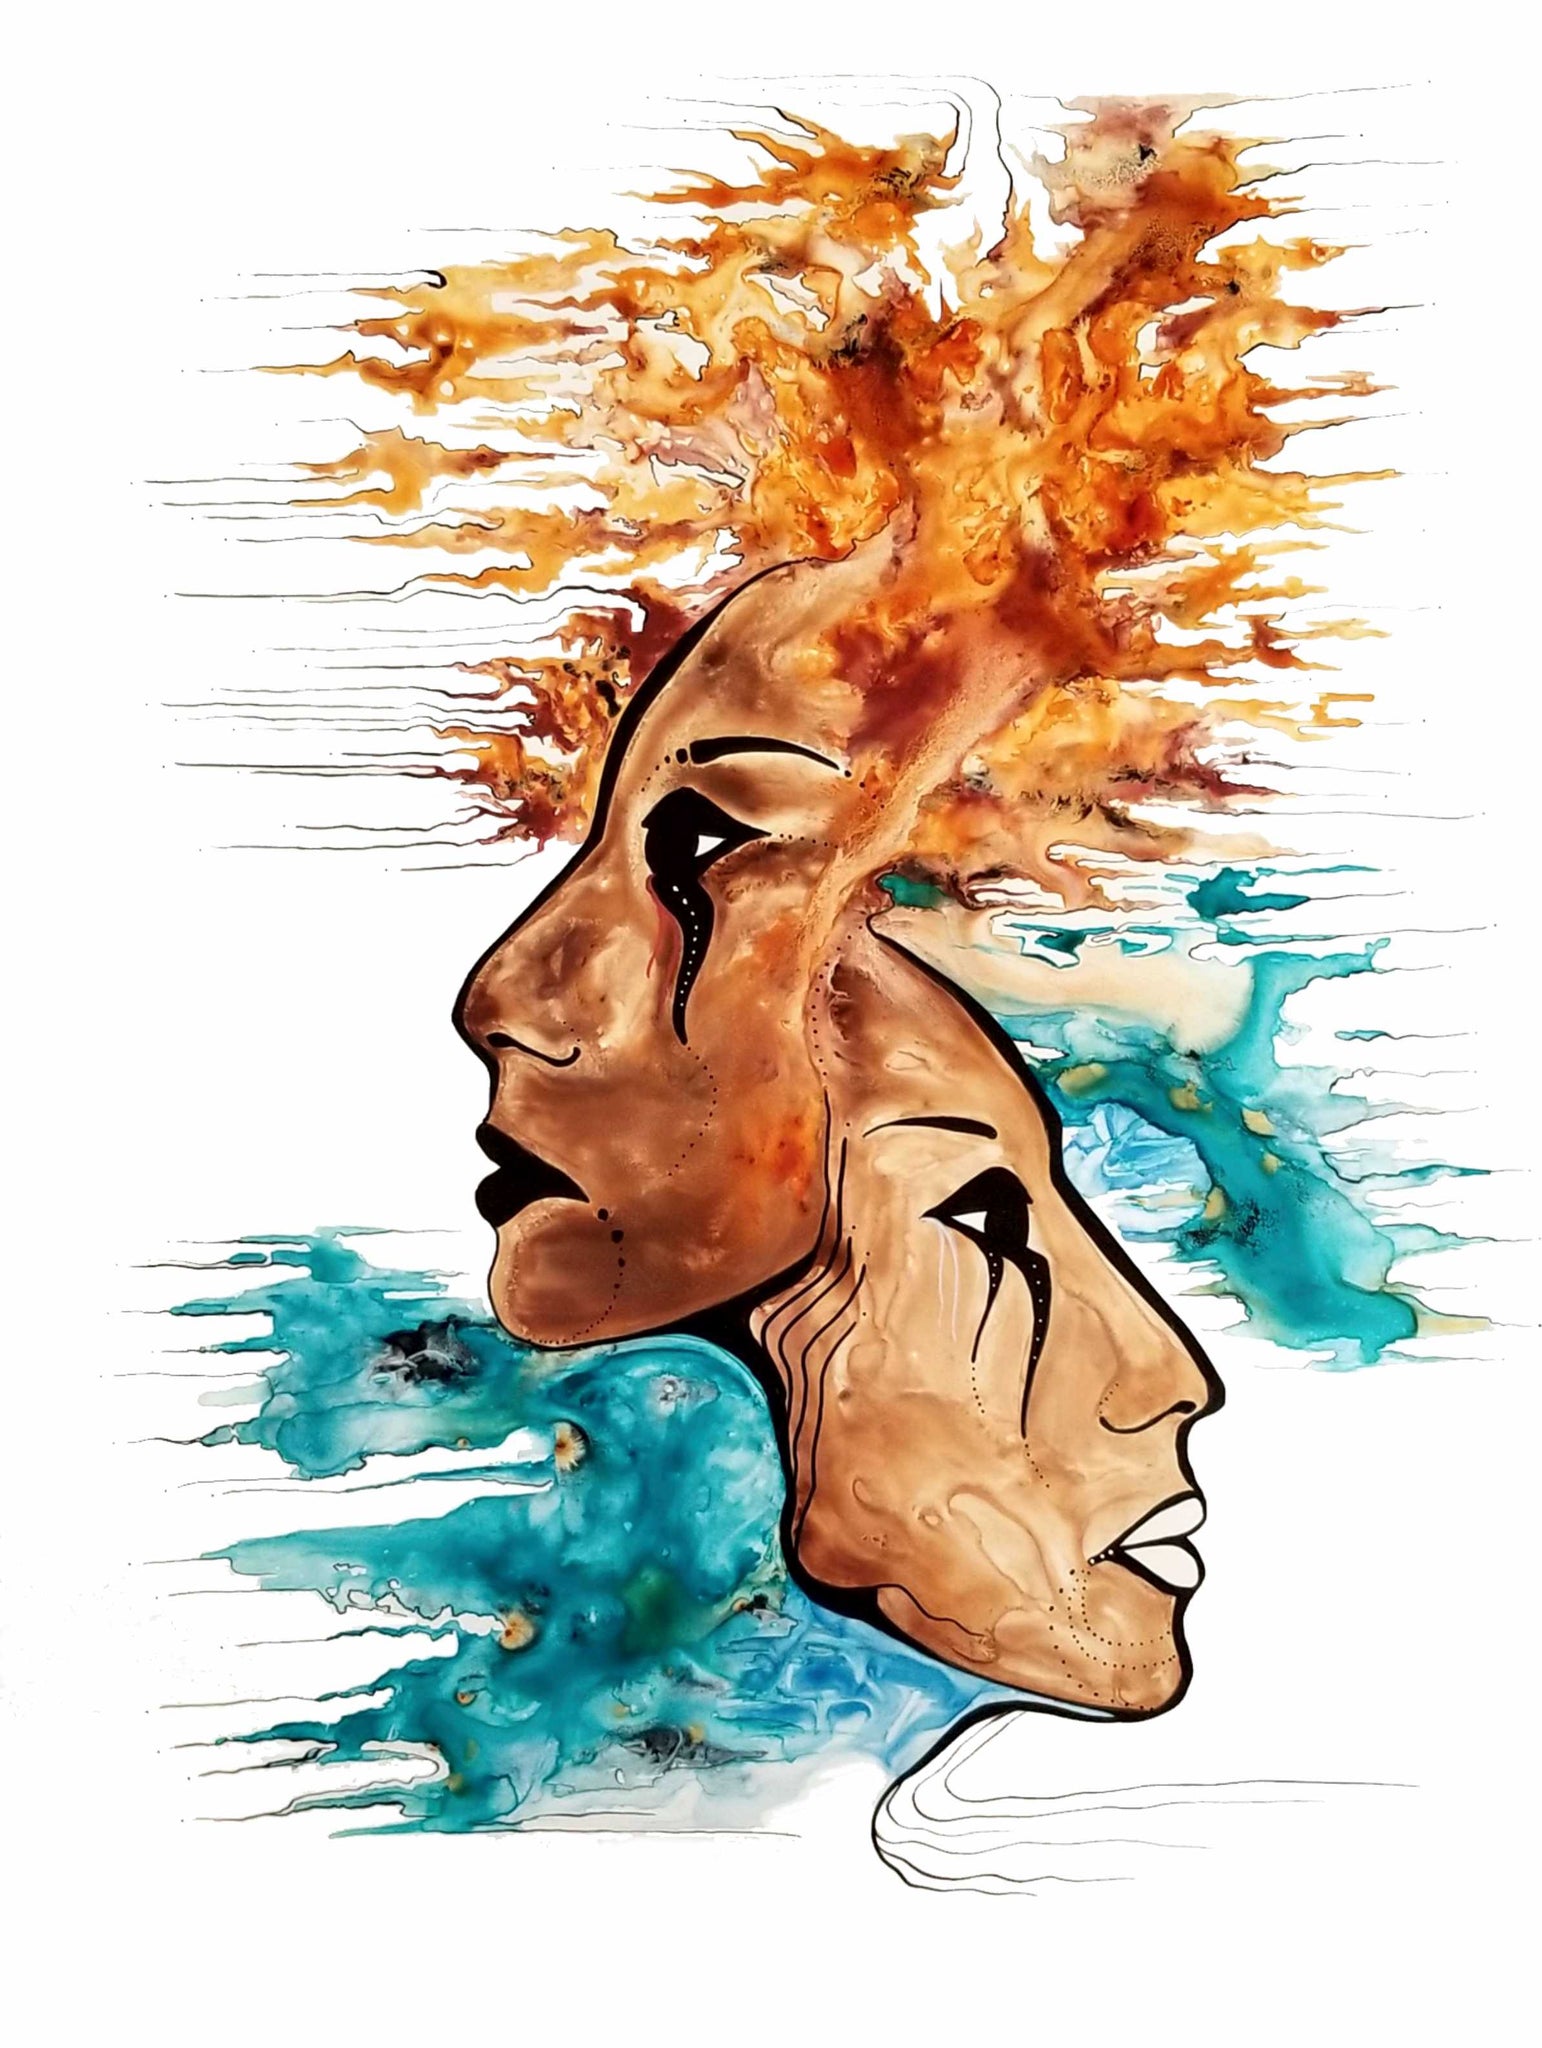 Fire and Water Sisters - 16x20" archival print